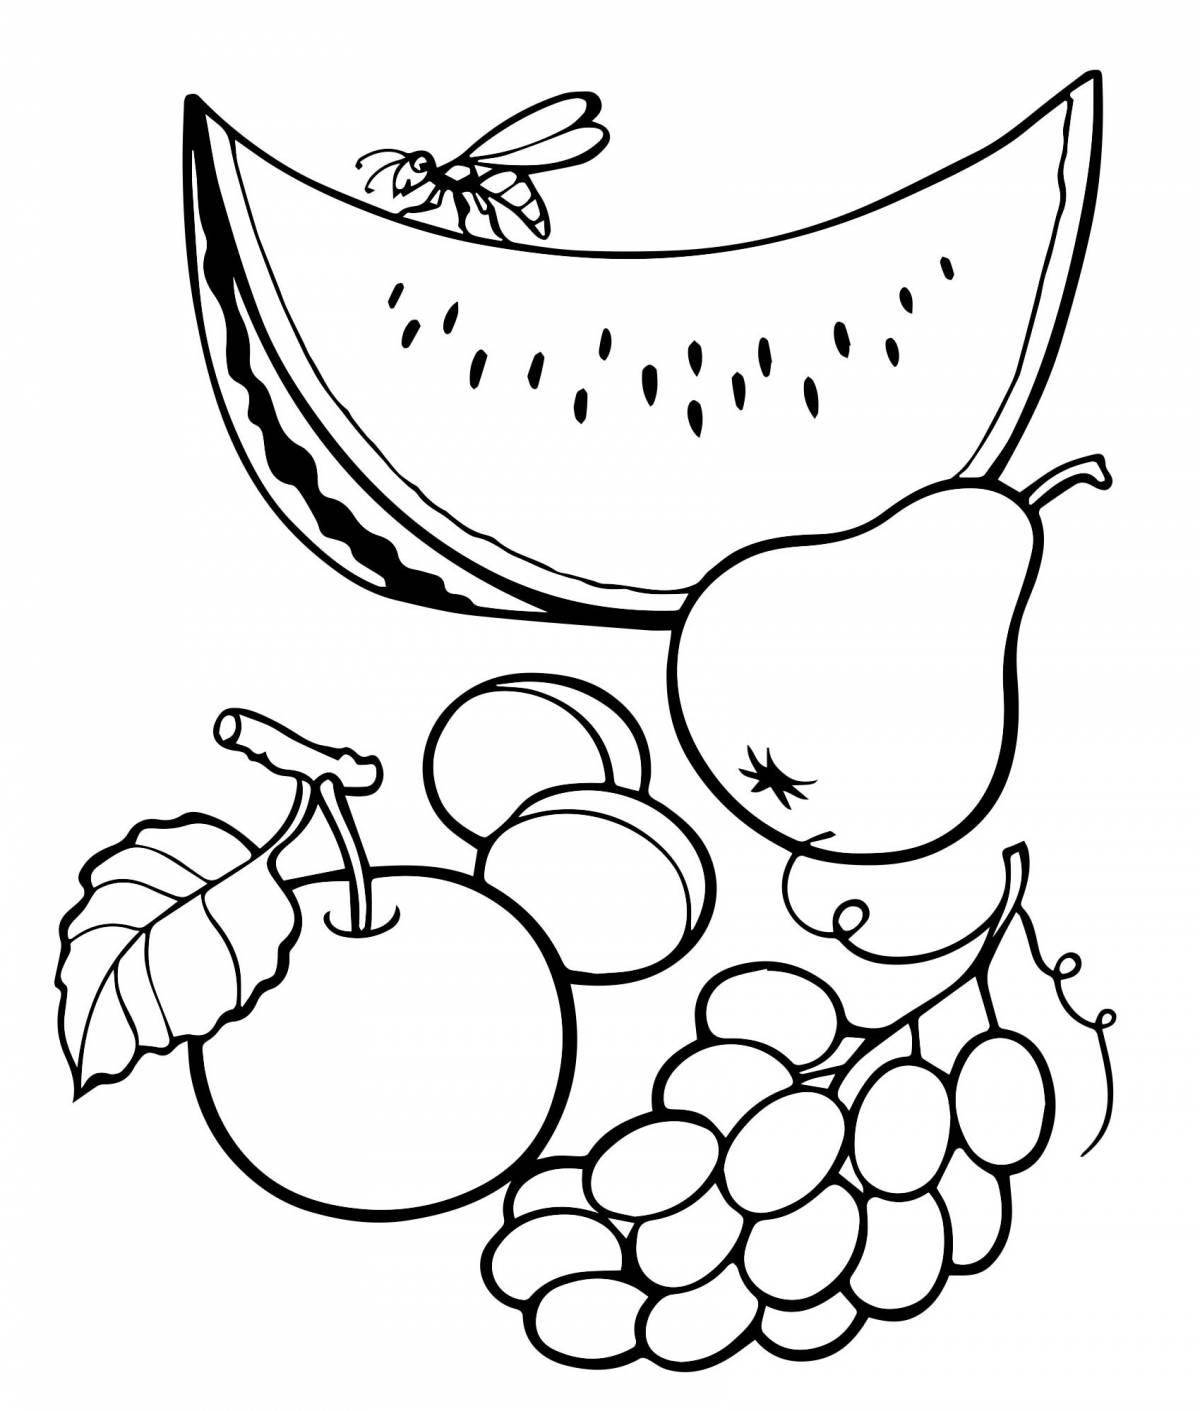 Colorful fruit coloring page for 2-3 year olds